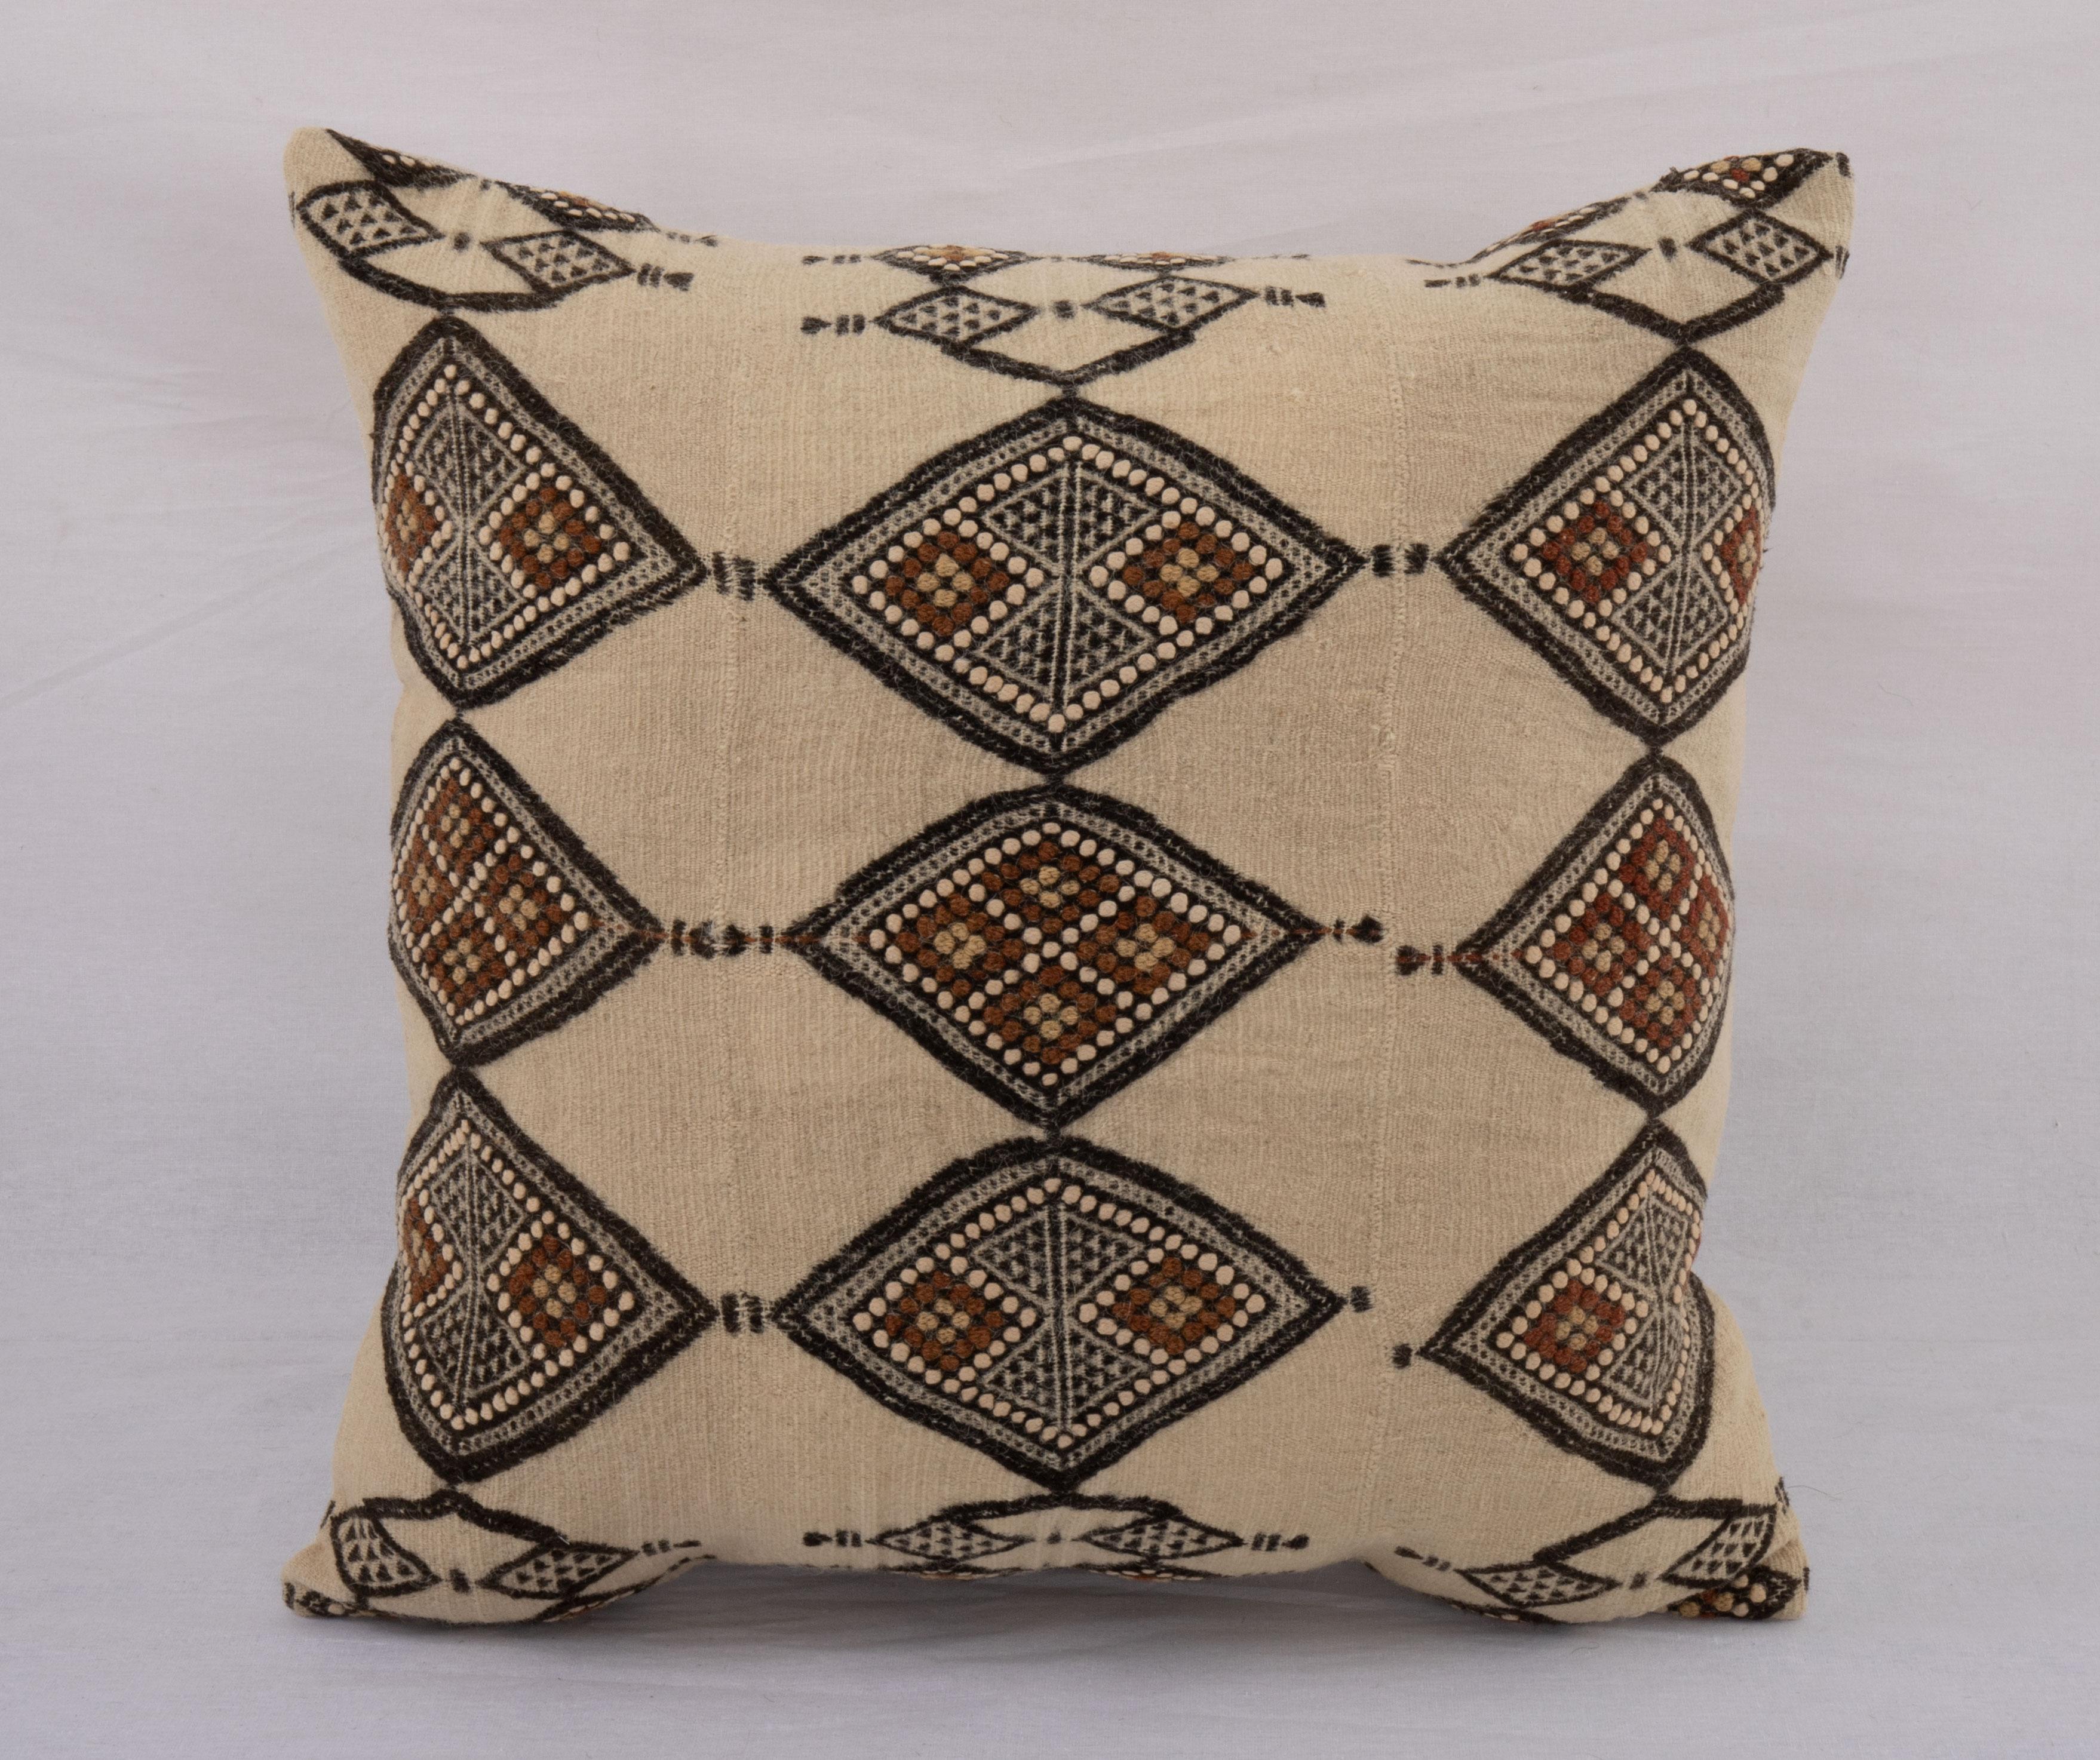 Pillow Cover Made from a Vintage West African Fulani Blanket


It does not come with an insert but a bag made from cotton fabric to accommodate insert materials.
Linen in the back.
Zipper closure.
Dry Cleaning reccommeded.
